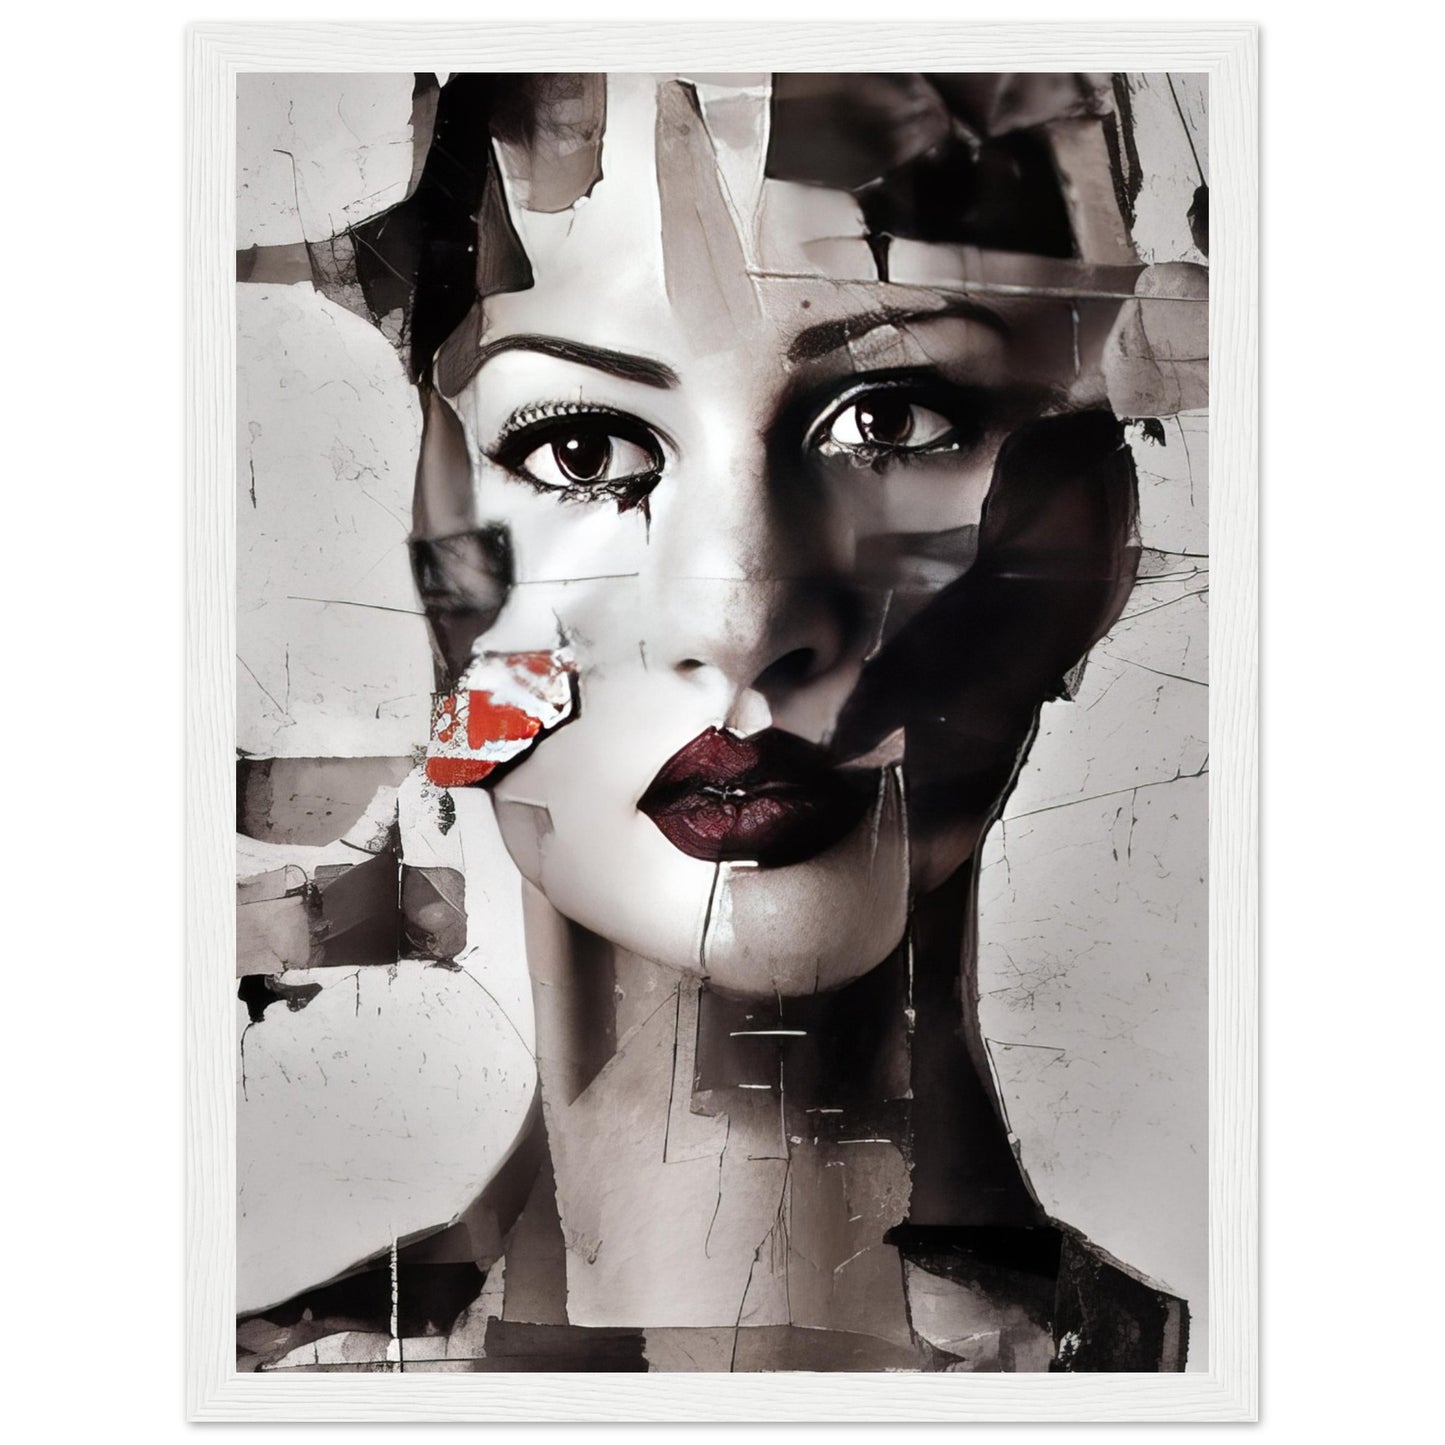 Put Together - Abstract Wall Art Collage Woman Face